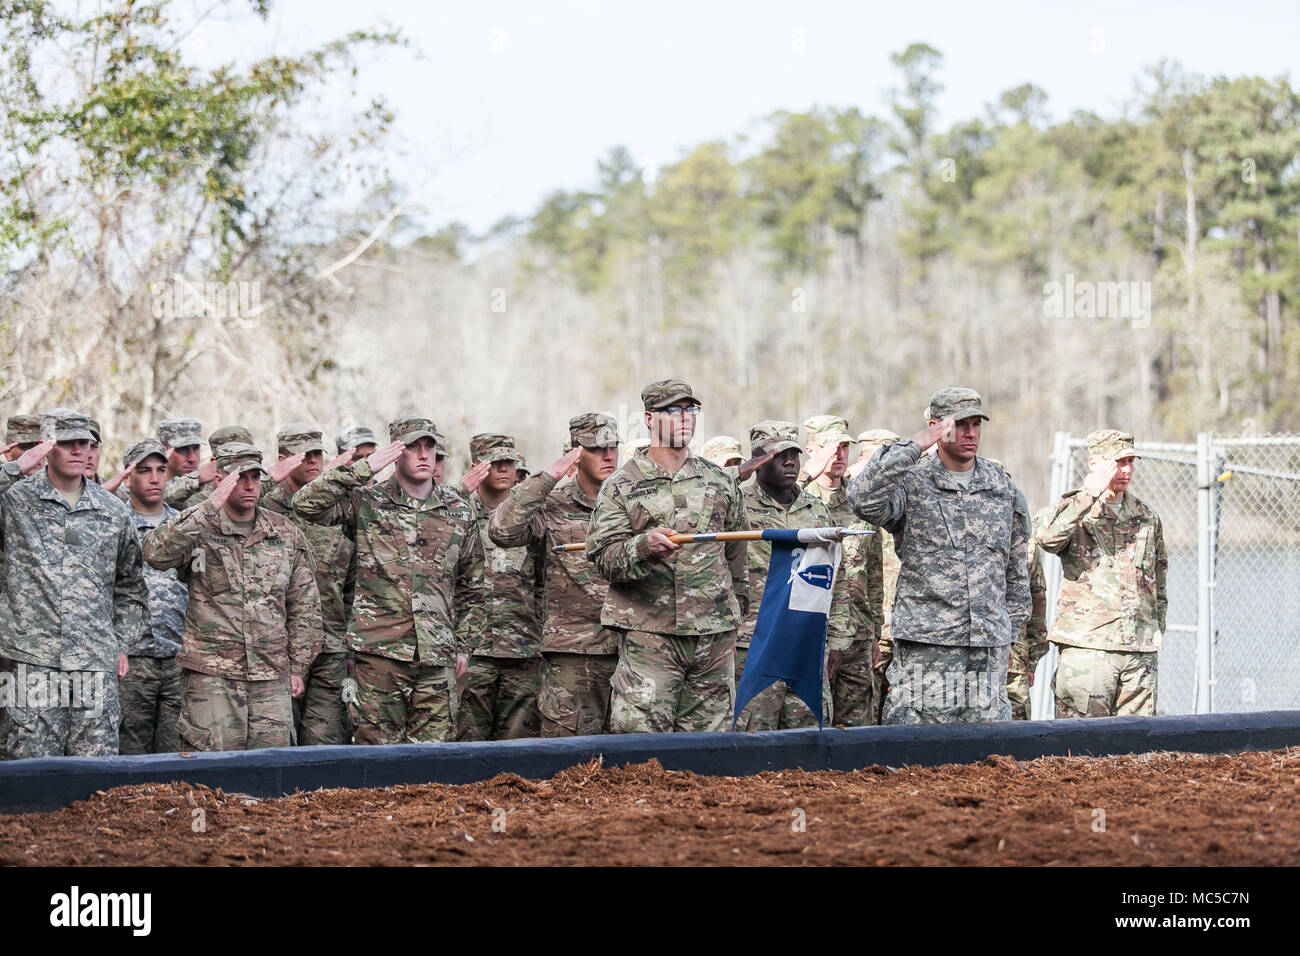 Cpl. Wu participates in Ranger Graduation Class 2-18 at Victory Pond, Maneuver Center of Excellence,  Fort Benning, Ga, on January 26, 2018. (Photo by Suhyoon Wood/MCoE PAO Photographer) Stock Photo